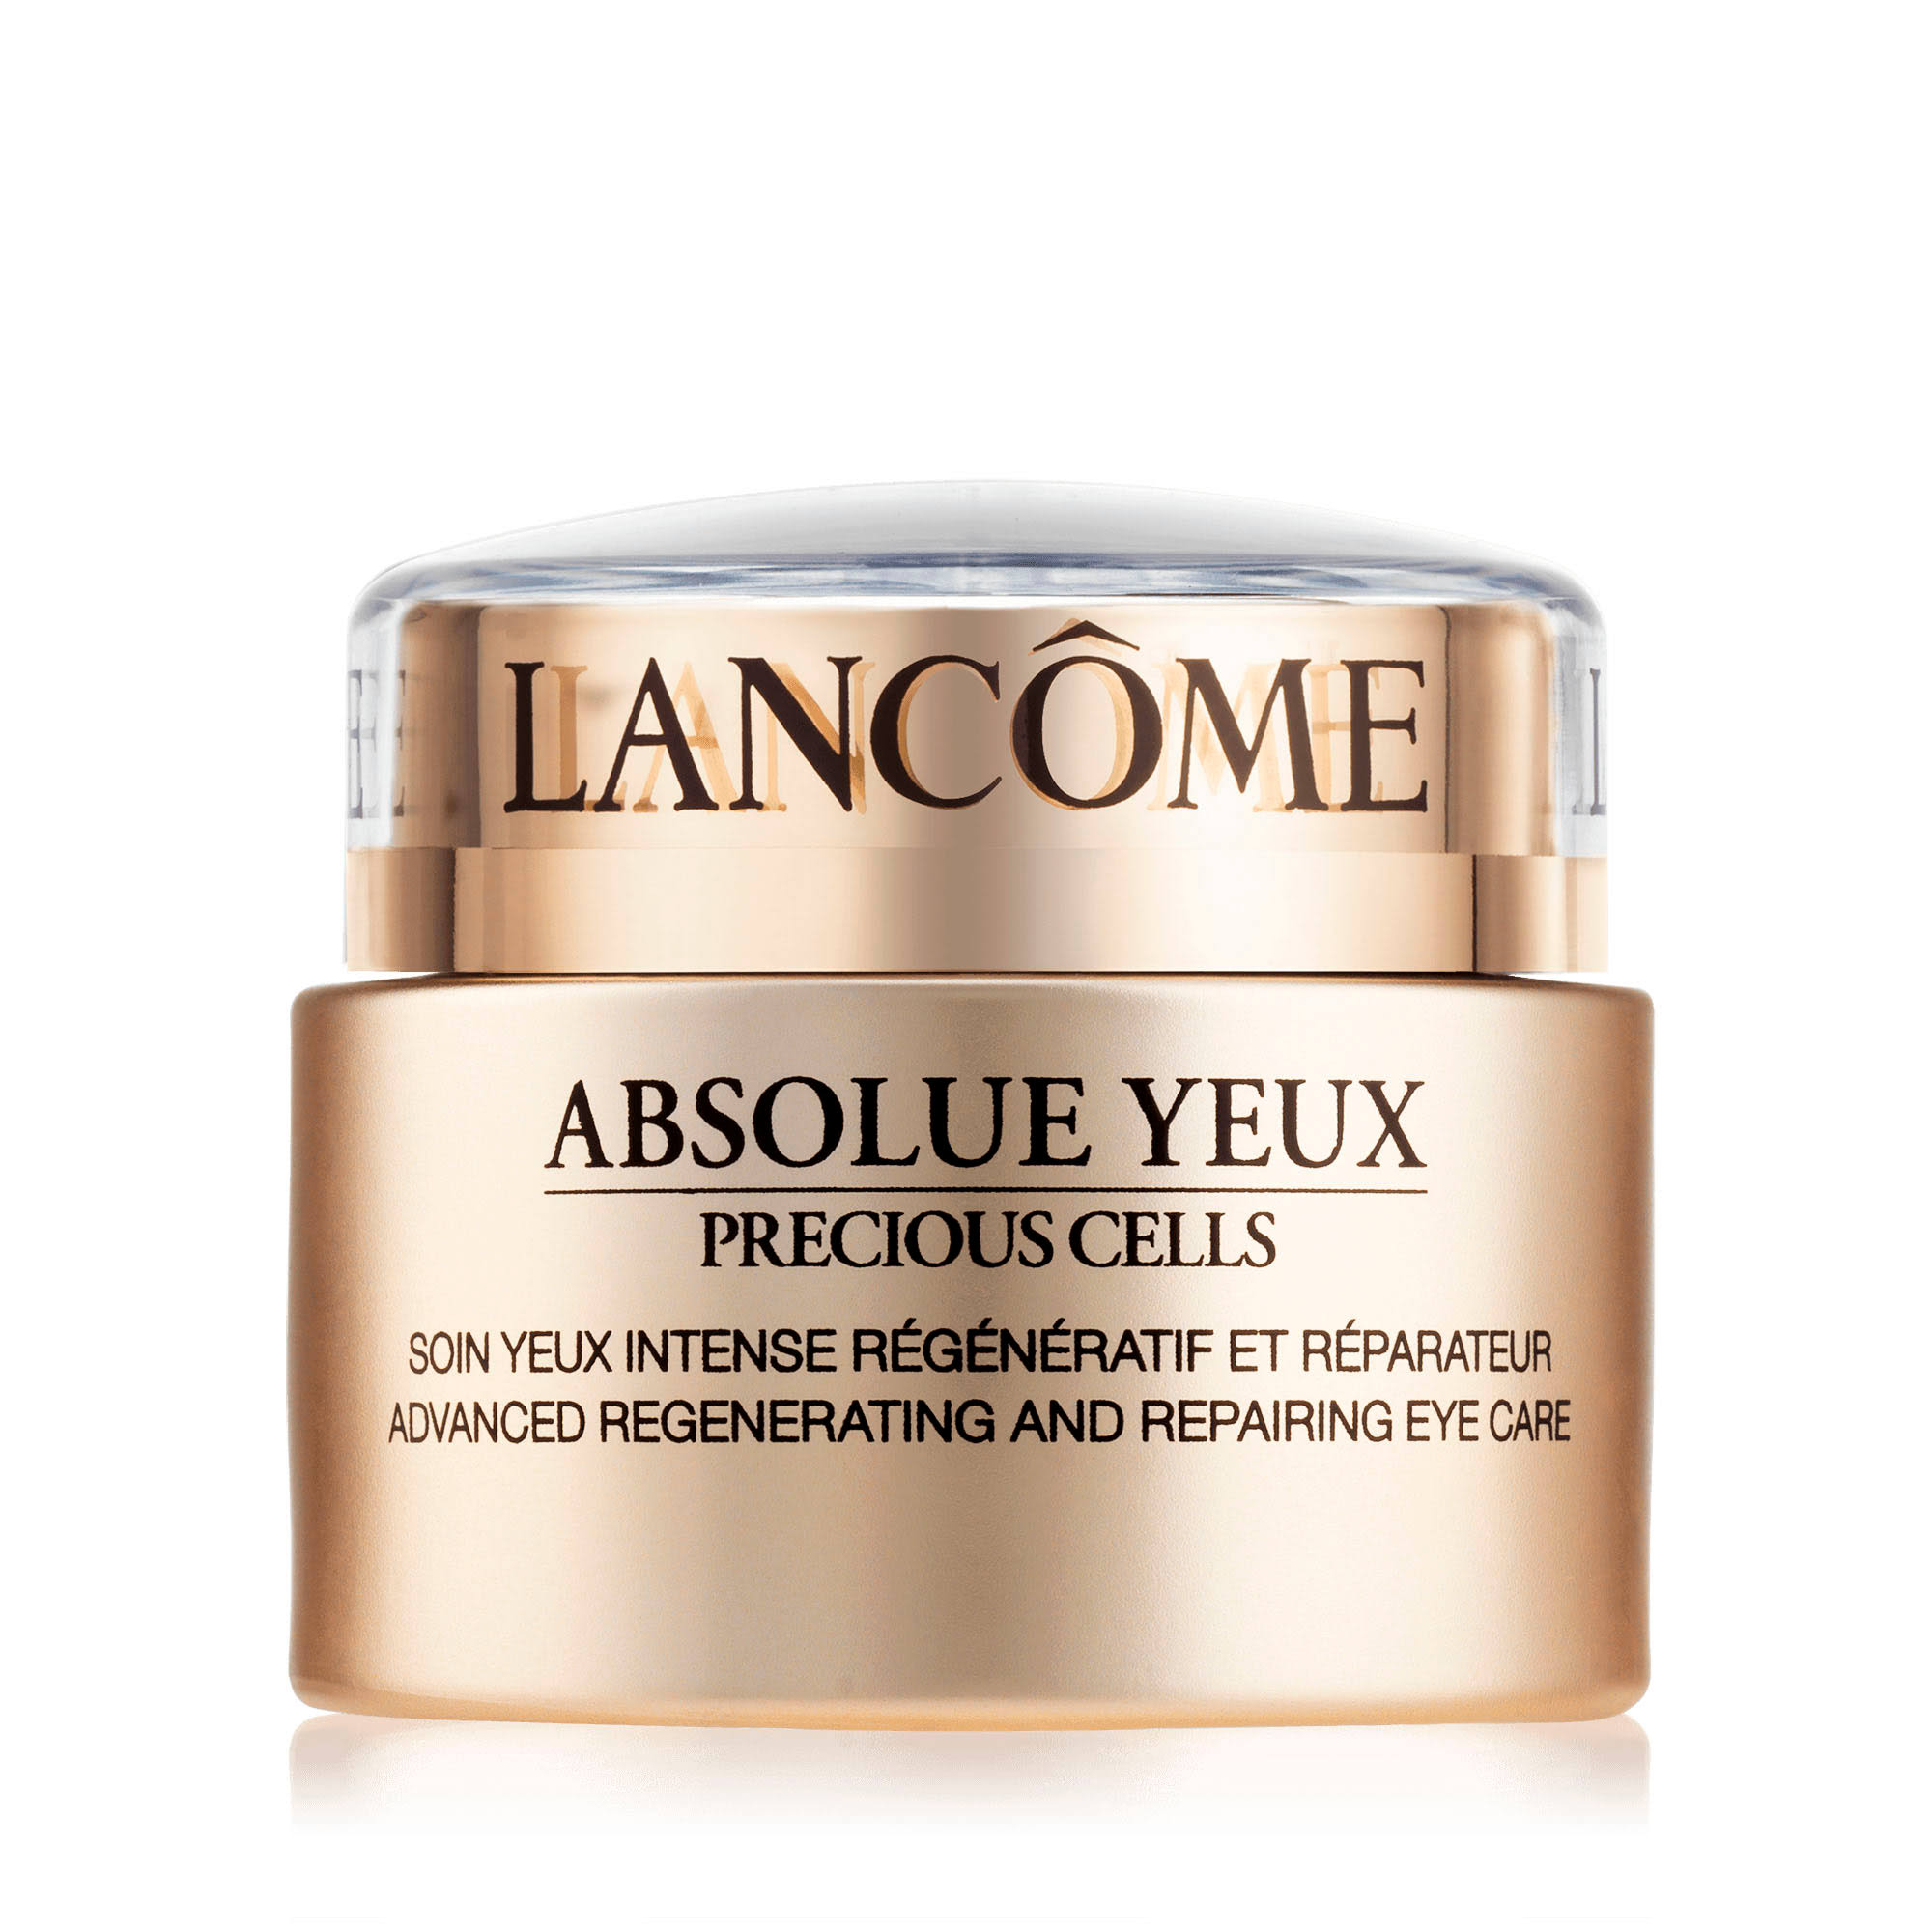 Lancome Absolue Yeux Precious Cells Eye Care - 20ml